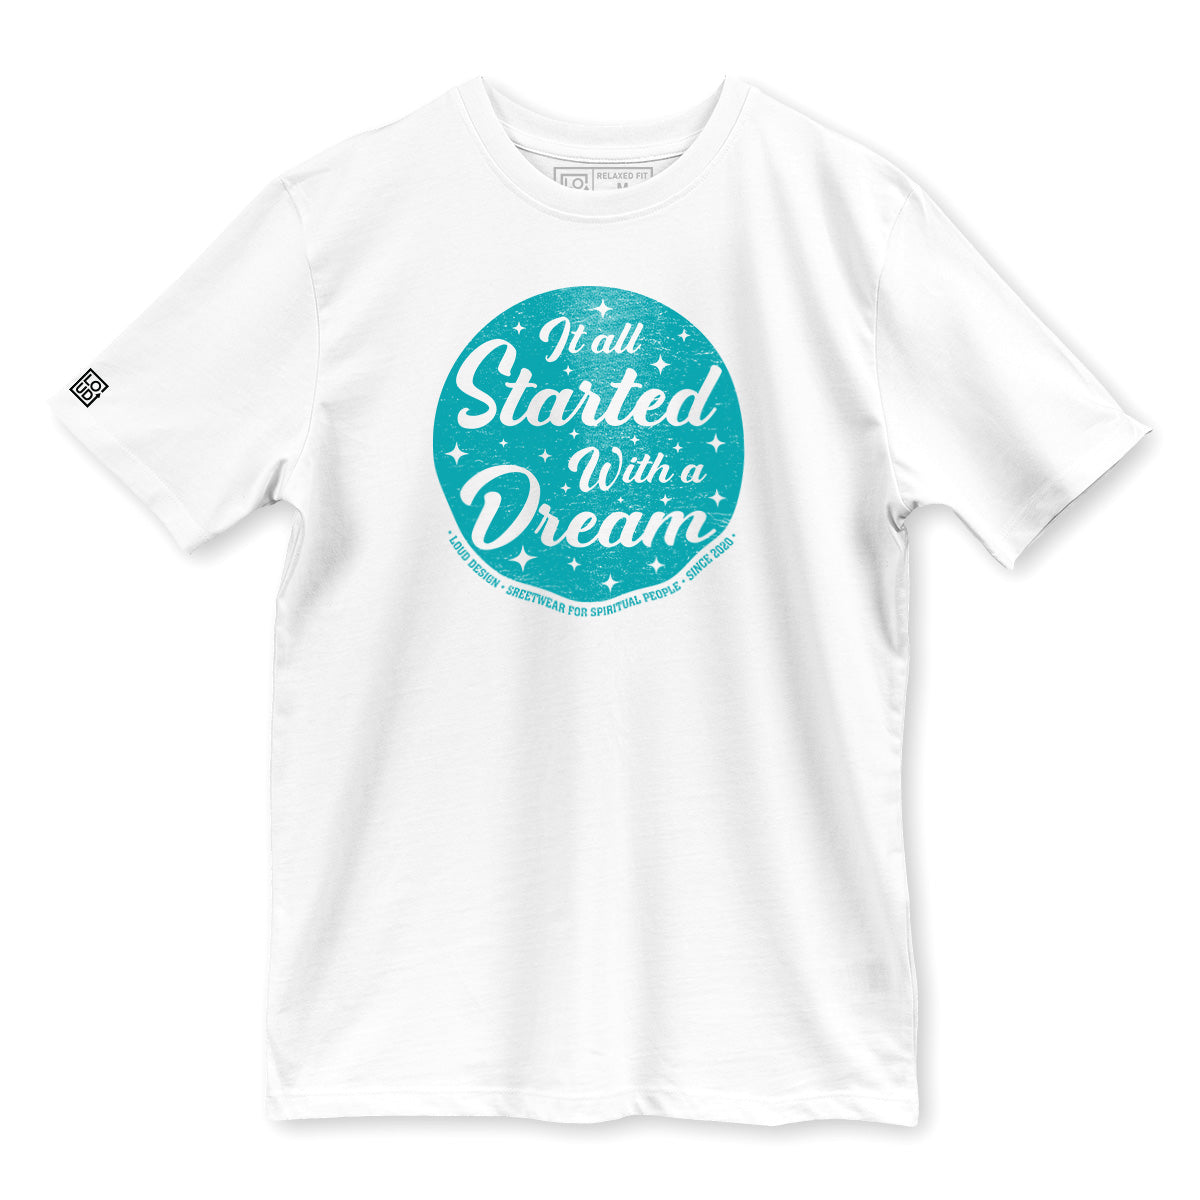 "It All Started With A Dream" Unisex T-Shirt